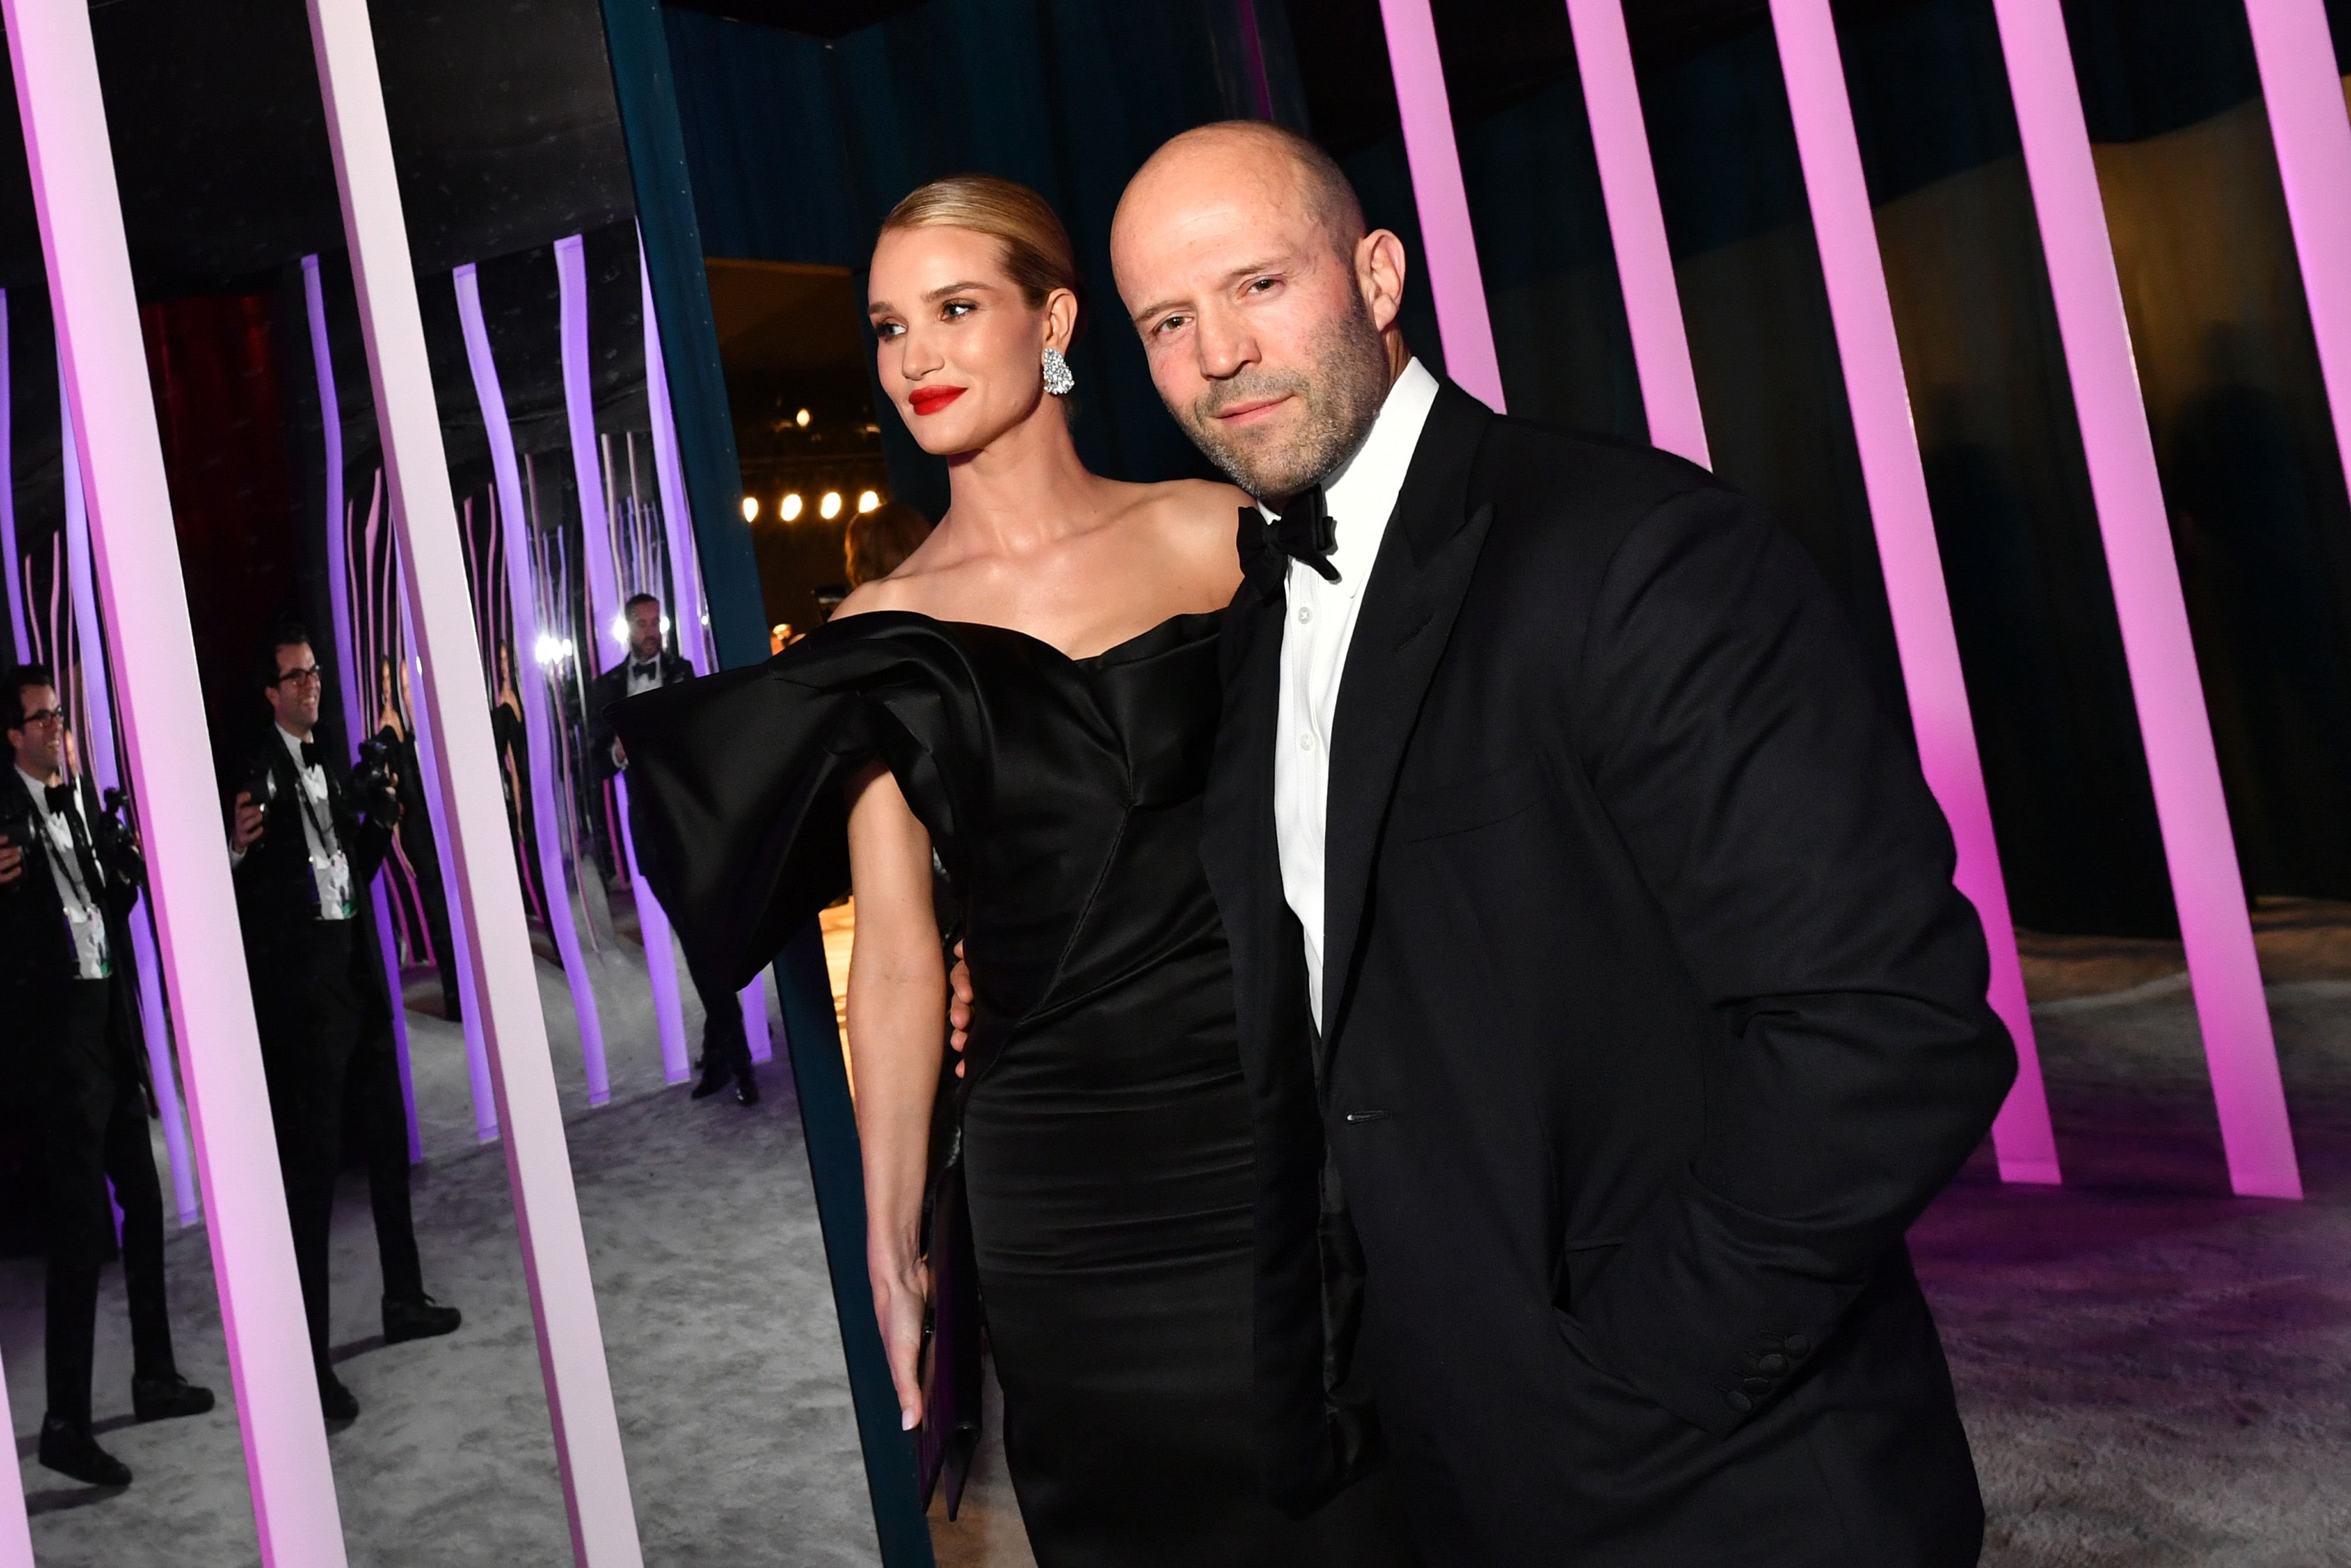 Rosie Huntington-Whiteley and Jason Statham at the 2020 Vanity Fair Oscar Party in February 2020 in Beverly Hills, California | Source: Getty Images